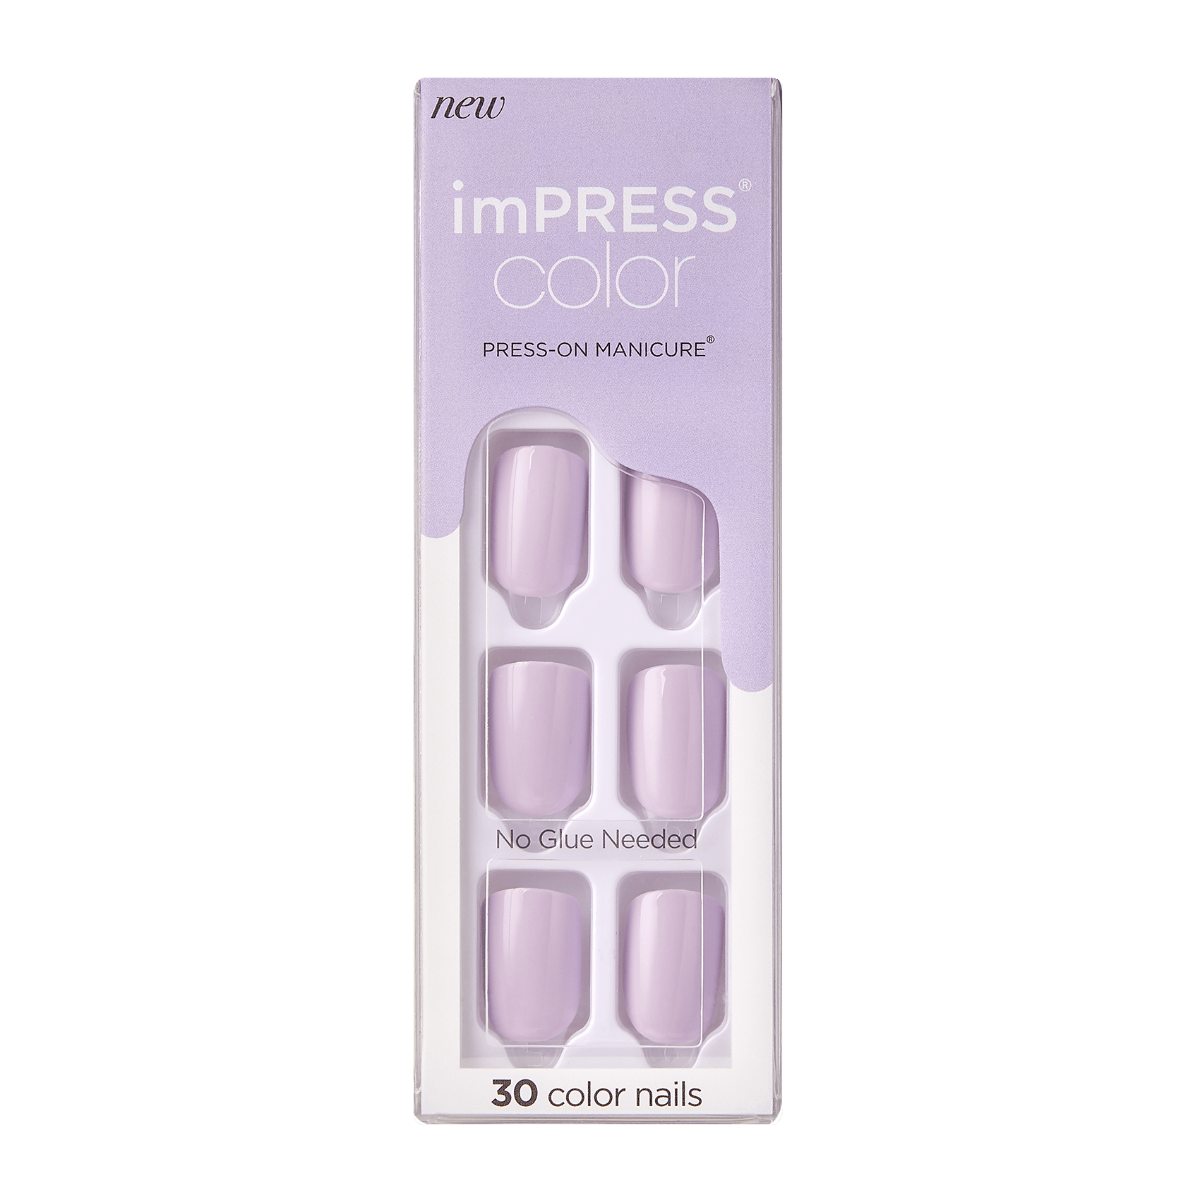 KISS ImPRESS Color Press-On Manicure - Picture Purplect - Taille S